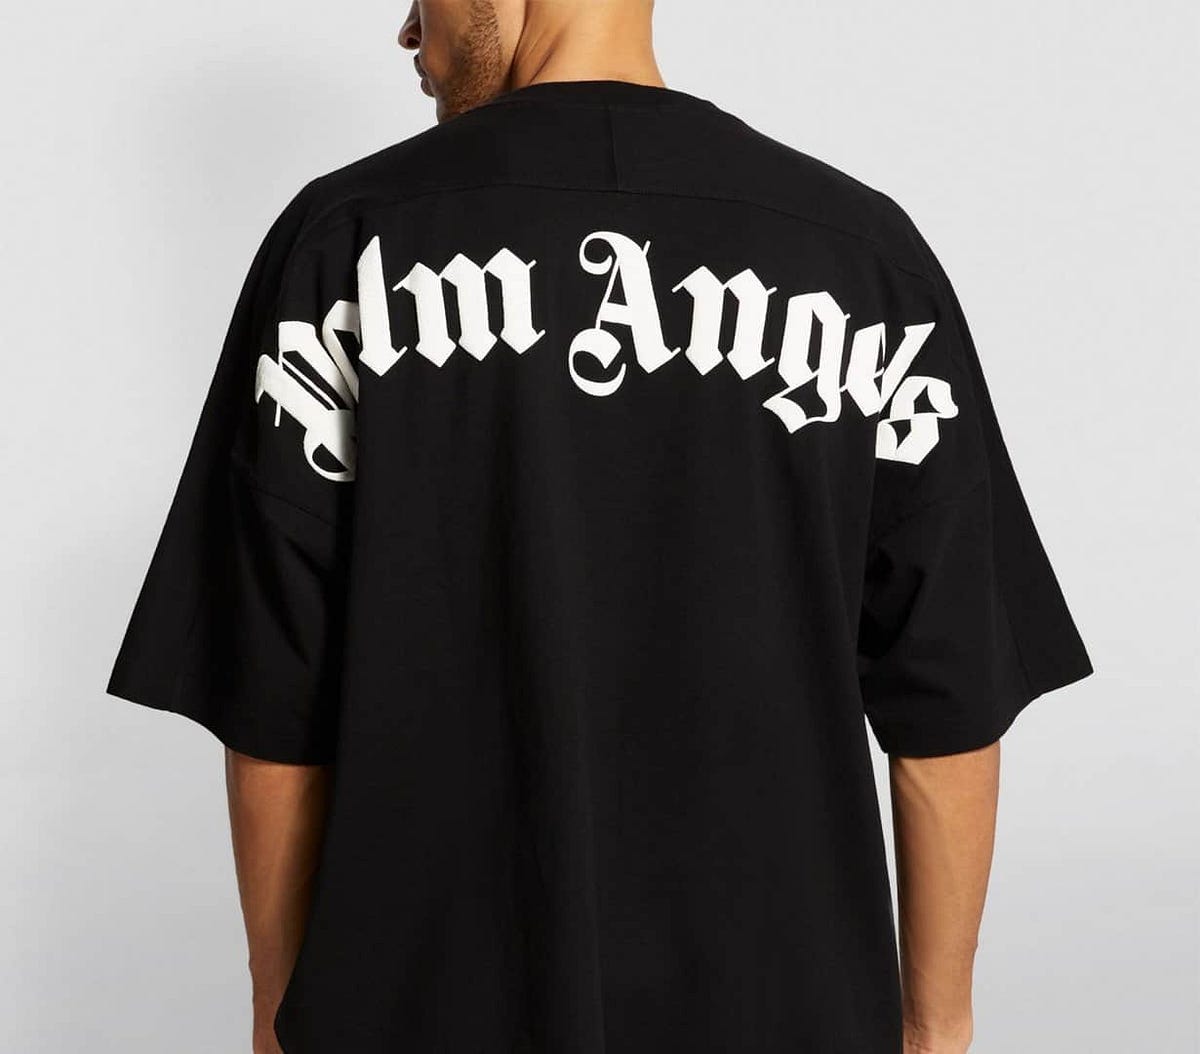 How To Spot Fake Palm Angels Oversized Logo Tee | by Palmangelsclothing ...